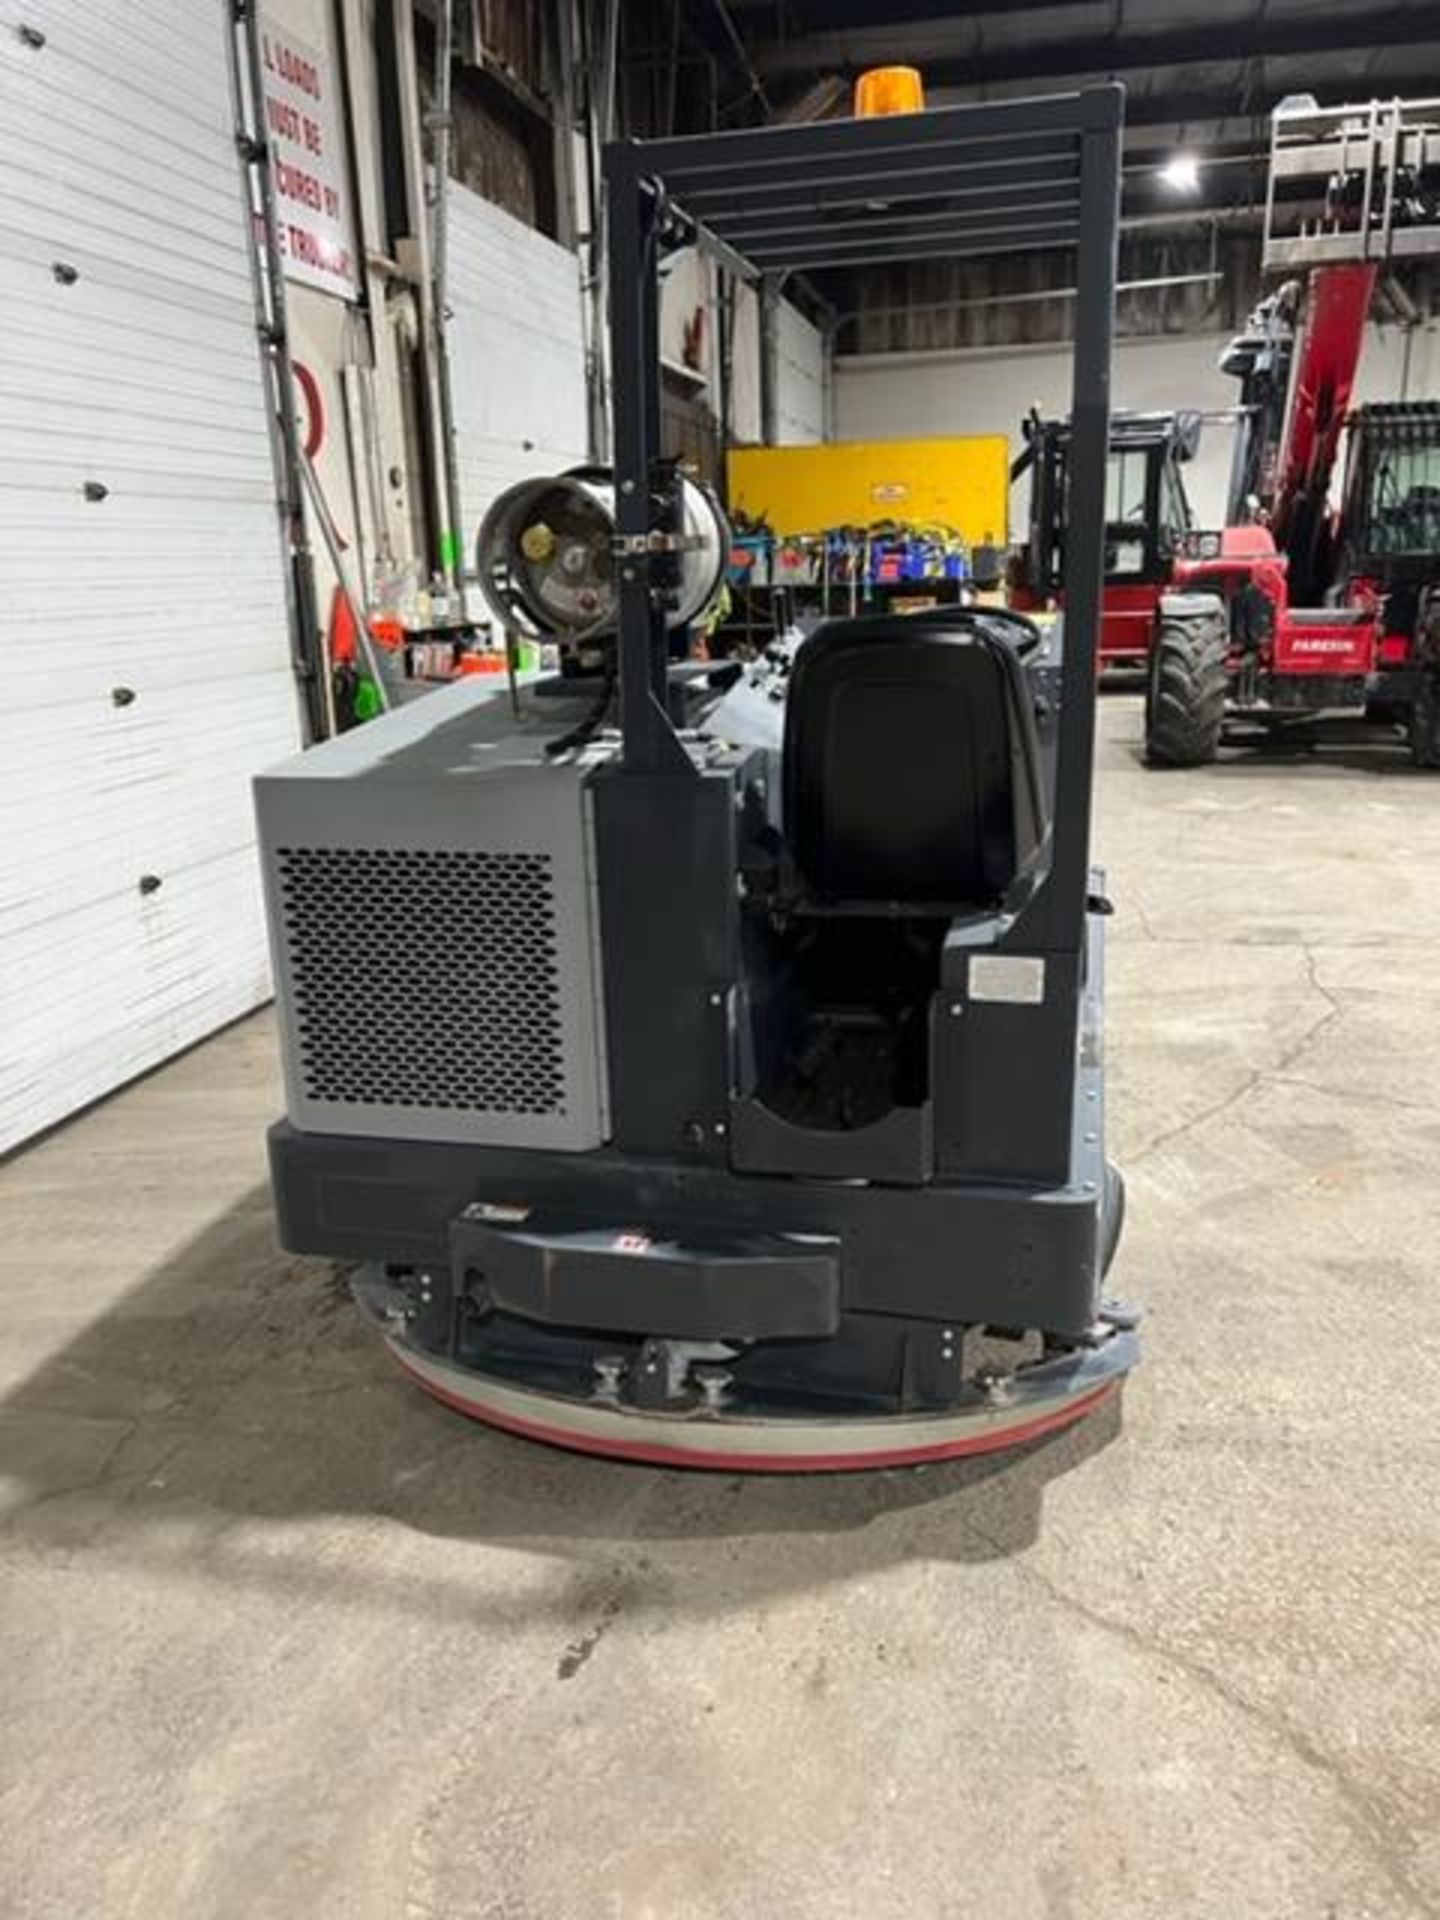 2014 Nilfisk Advance Model 7765 Floor Cleaning Machine Sweeper Scrubber Unit LPG (propane) with - Image 5 of 6